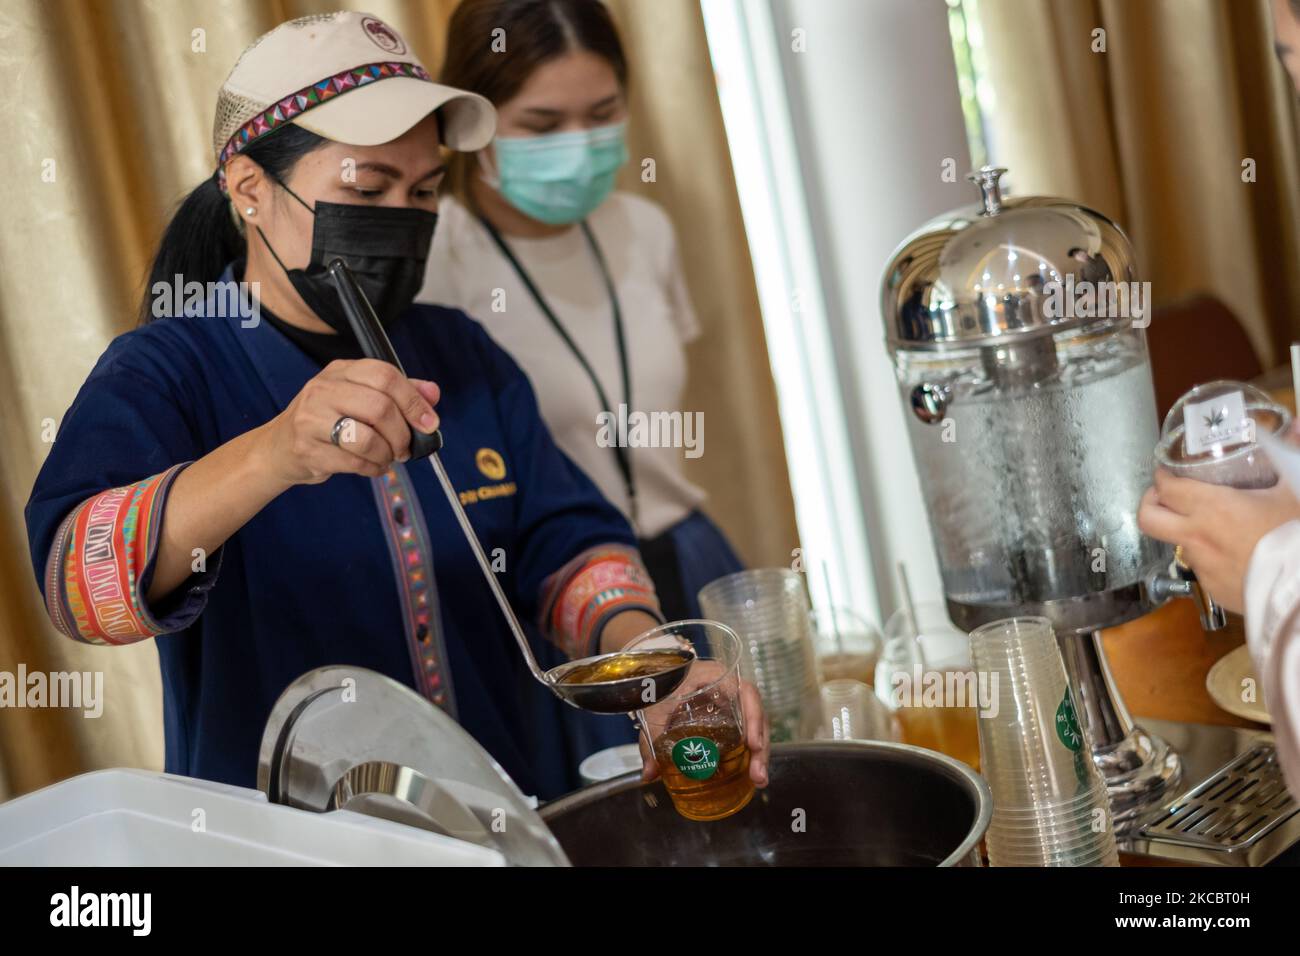 Thai chef prepares a infuse use cannabis extract on March 26, 2021 in Bangkok, Thailand. Cannabis and its derivates can now be used in food and drinks provided they meet Thai FDA regulations. Thailand is moving to legalize cannabis and its derivates in the hope of becoming a global hub for medical marijuana. The government is now those who apply to grow the crop, provided they comply with FDA regulations. (Photo by Thomas De Cian/NurPhoto) Stock Photo